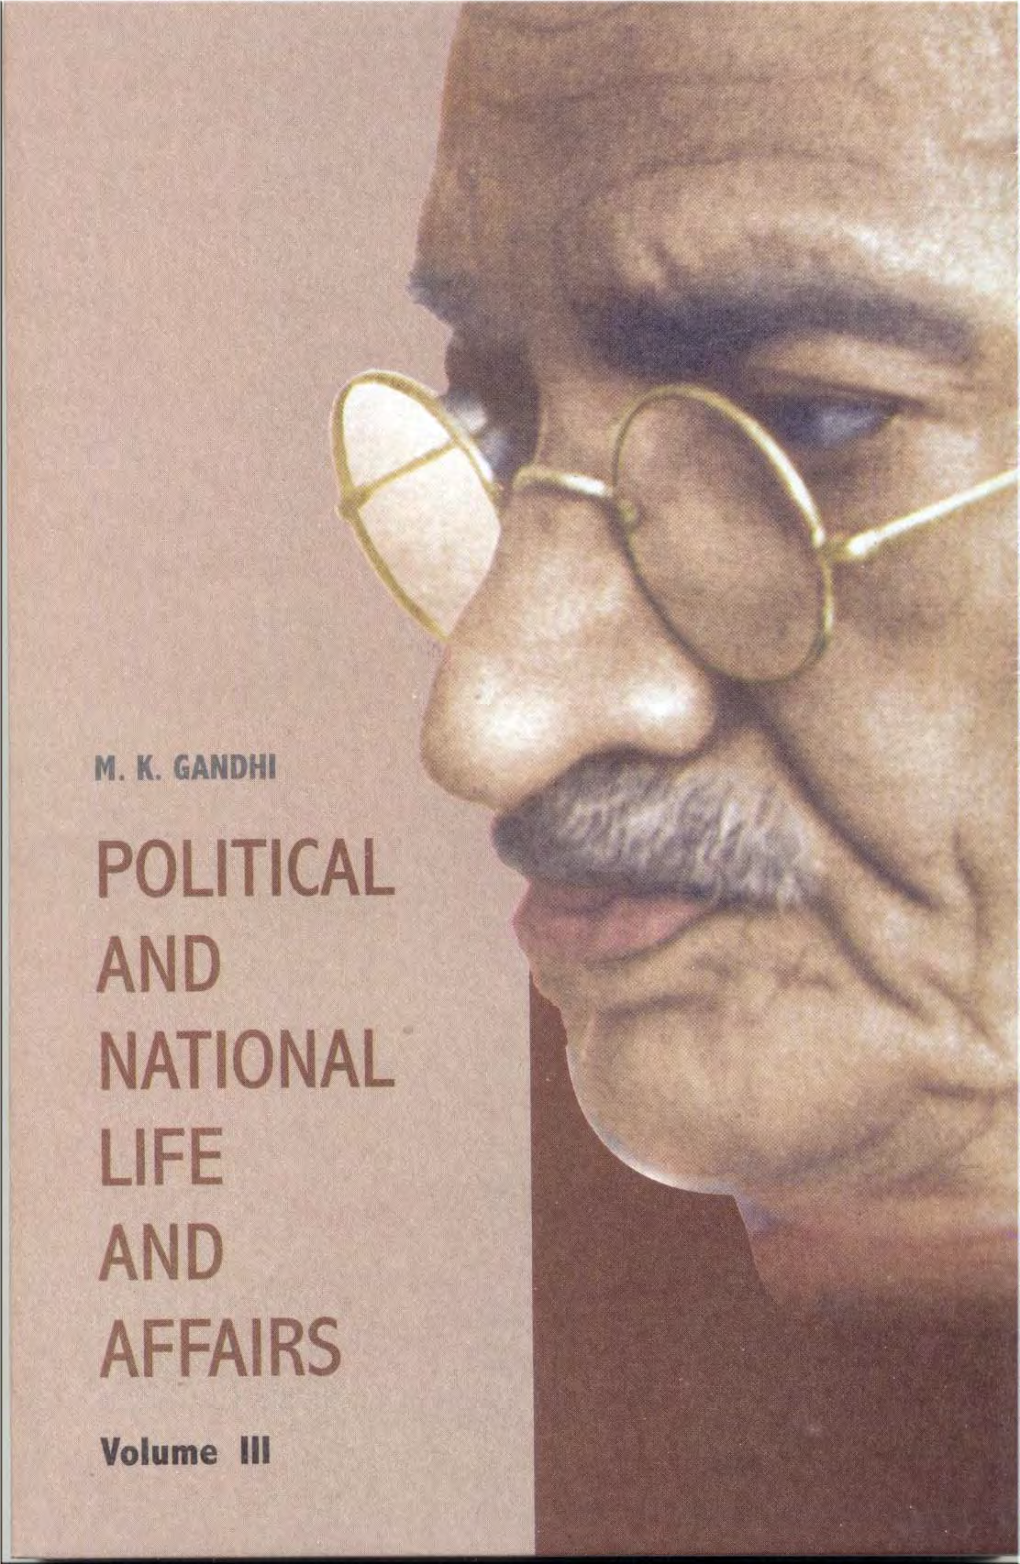 Political and National Life and Affairs – Part III